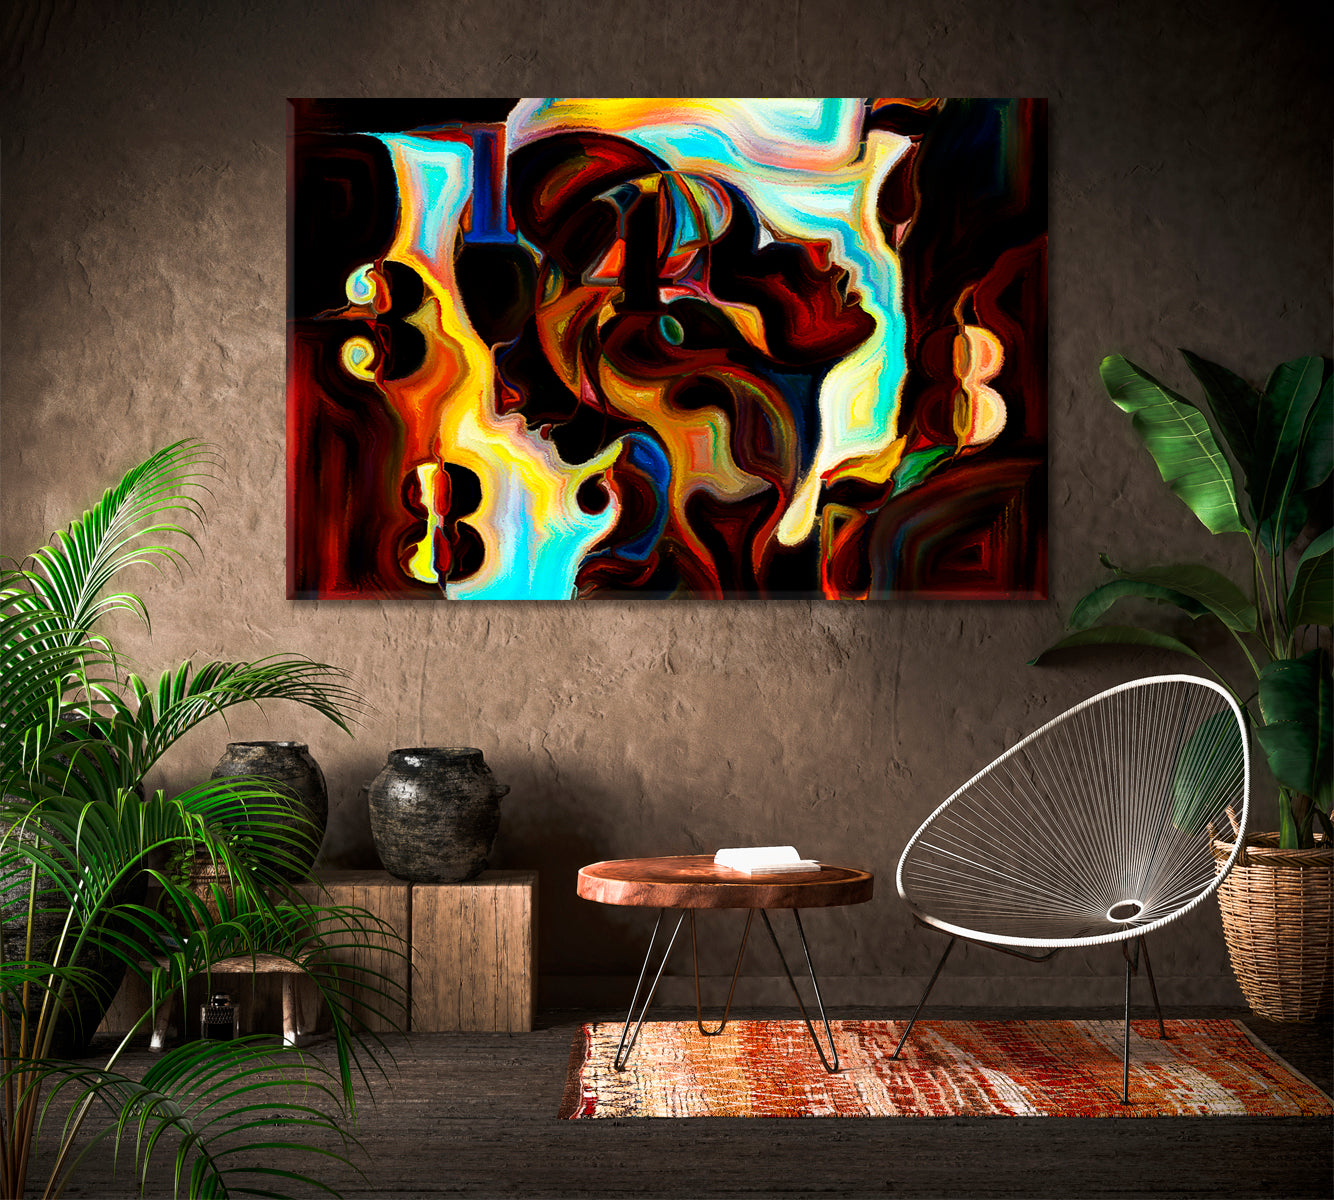 Abstract Forms Shapes Unique Design Wall Art Canvas Print Contemporary Art Artesty 1 panel 24" x 16" 